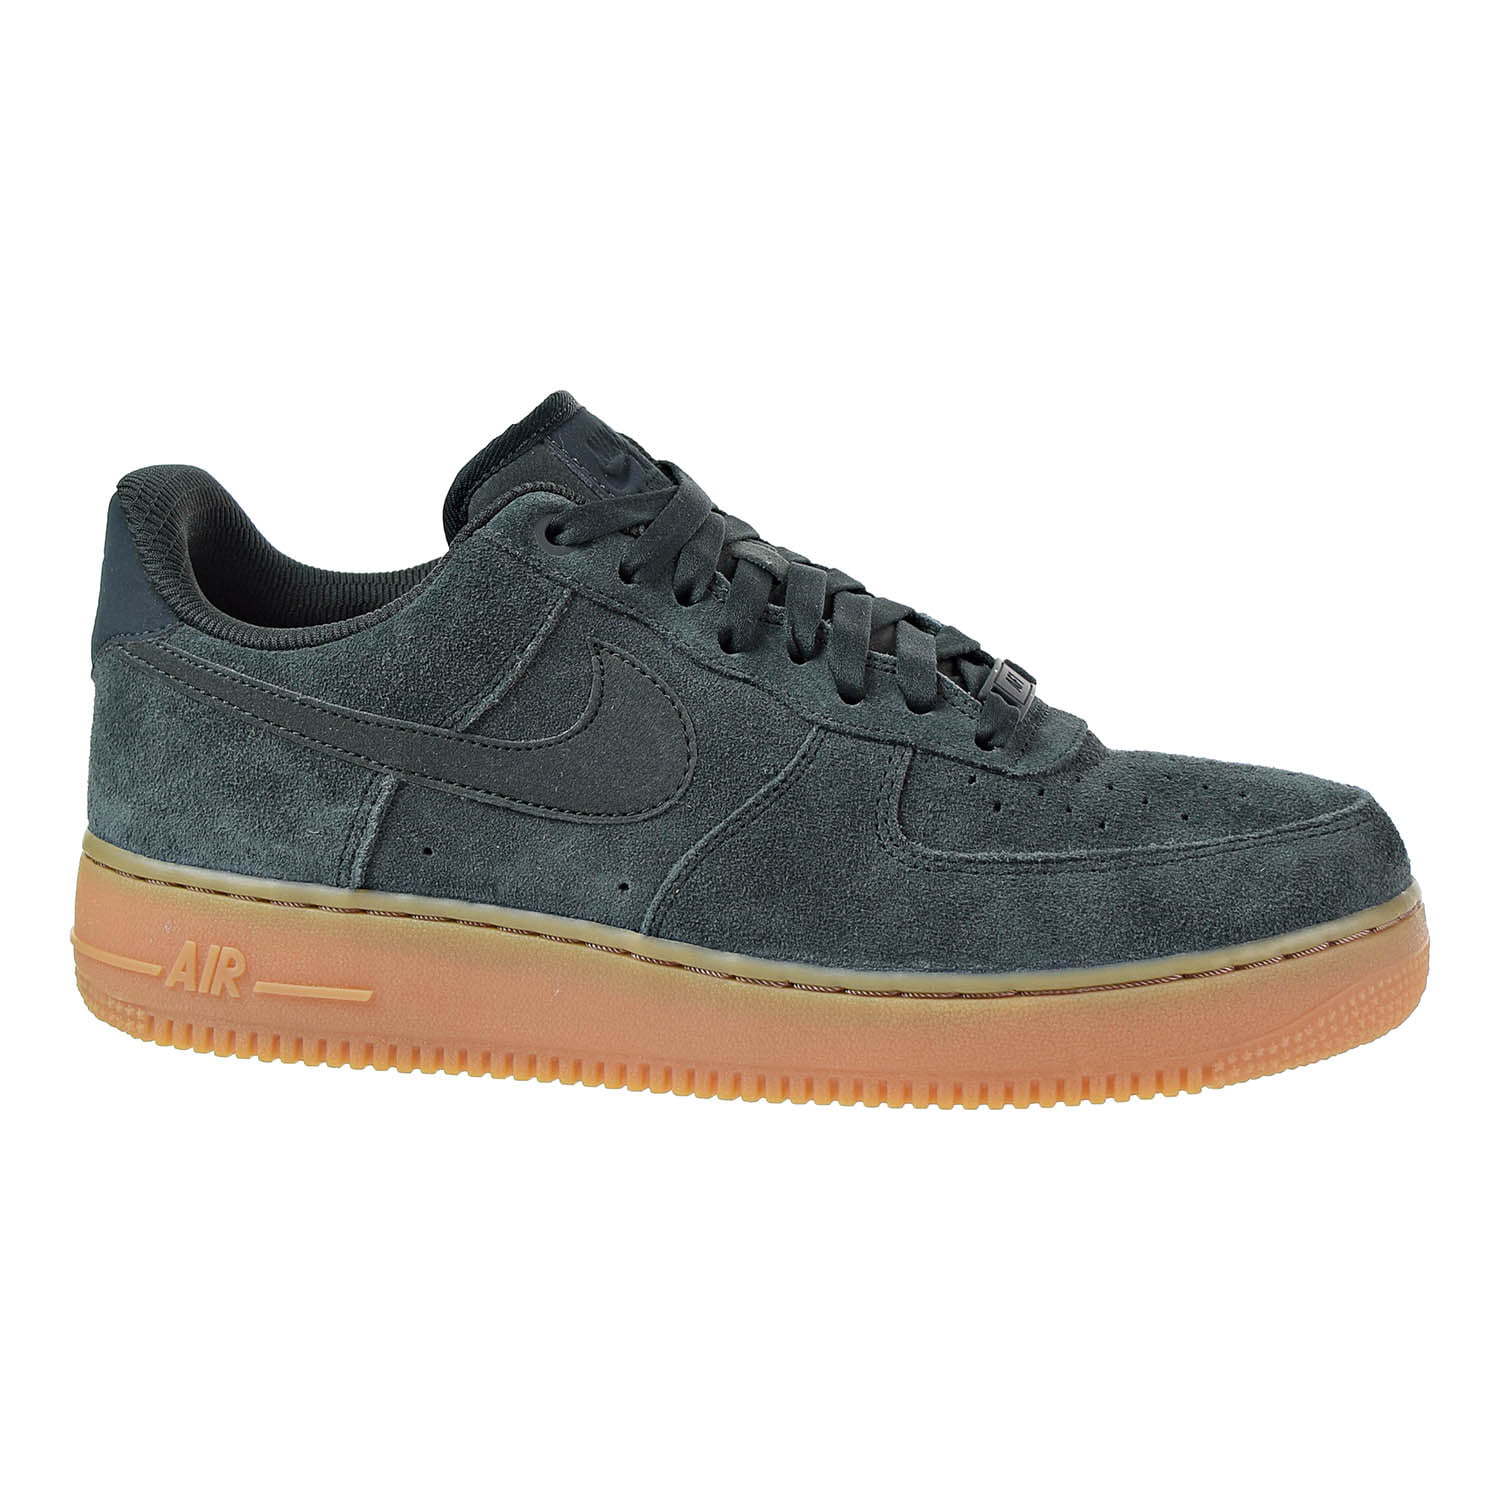 Nike - Nike Air Force 1 '07 SE Women's Shoes Outdoor Green/Outdoor Green  aa0287-300 - Walmart.com - Walmart.com